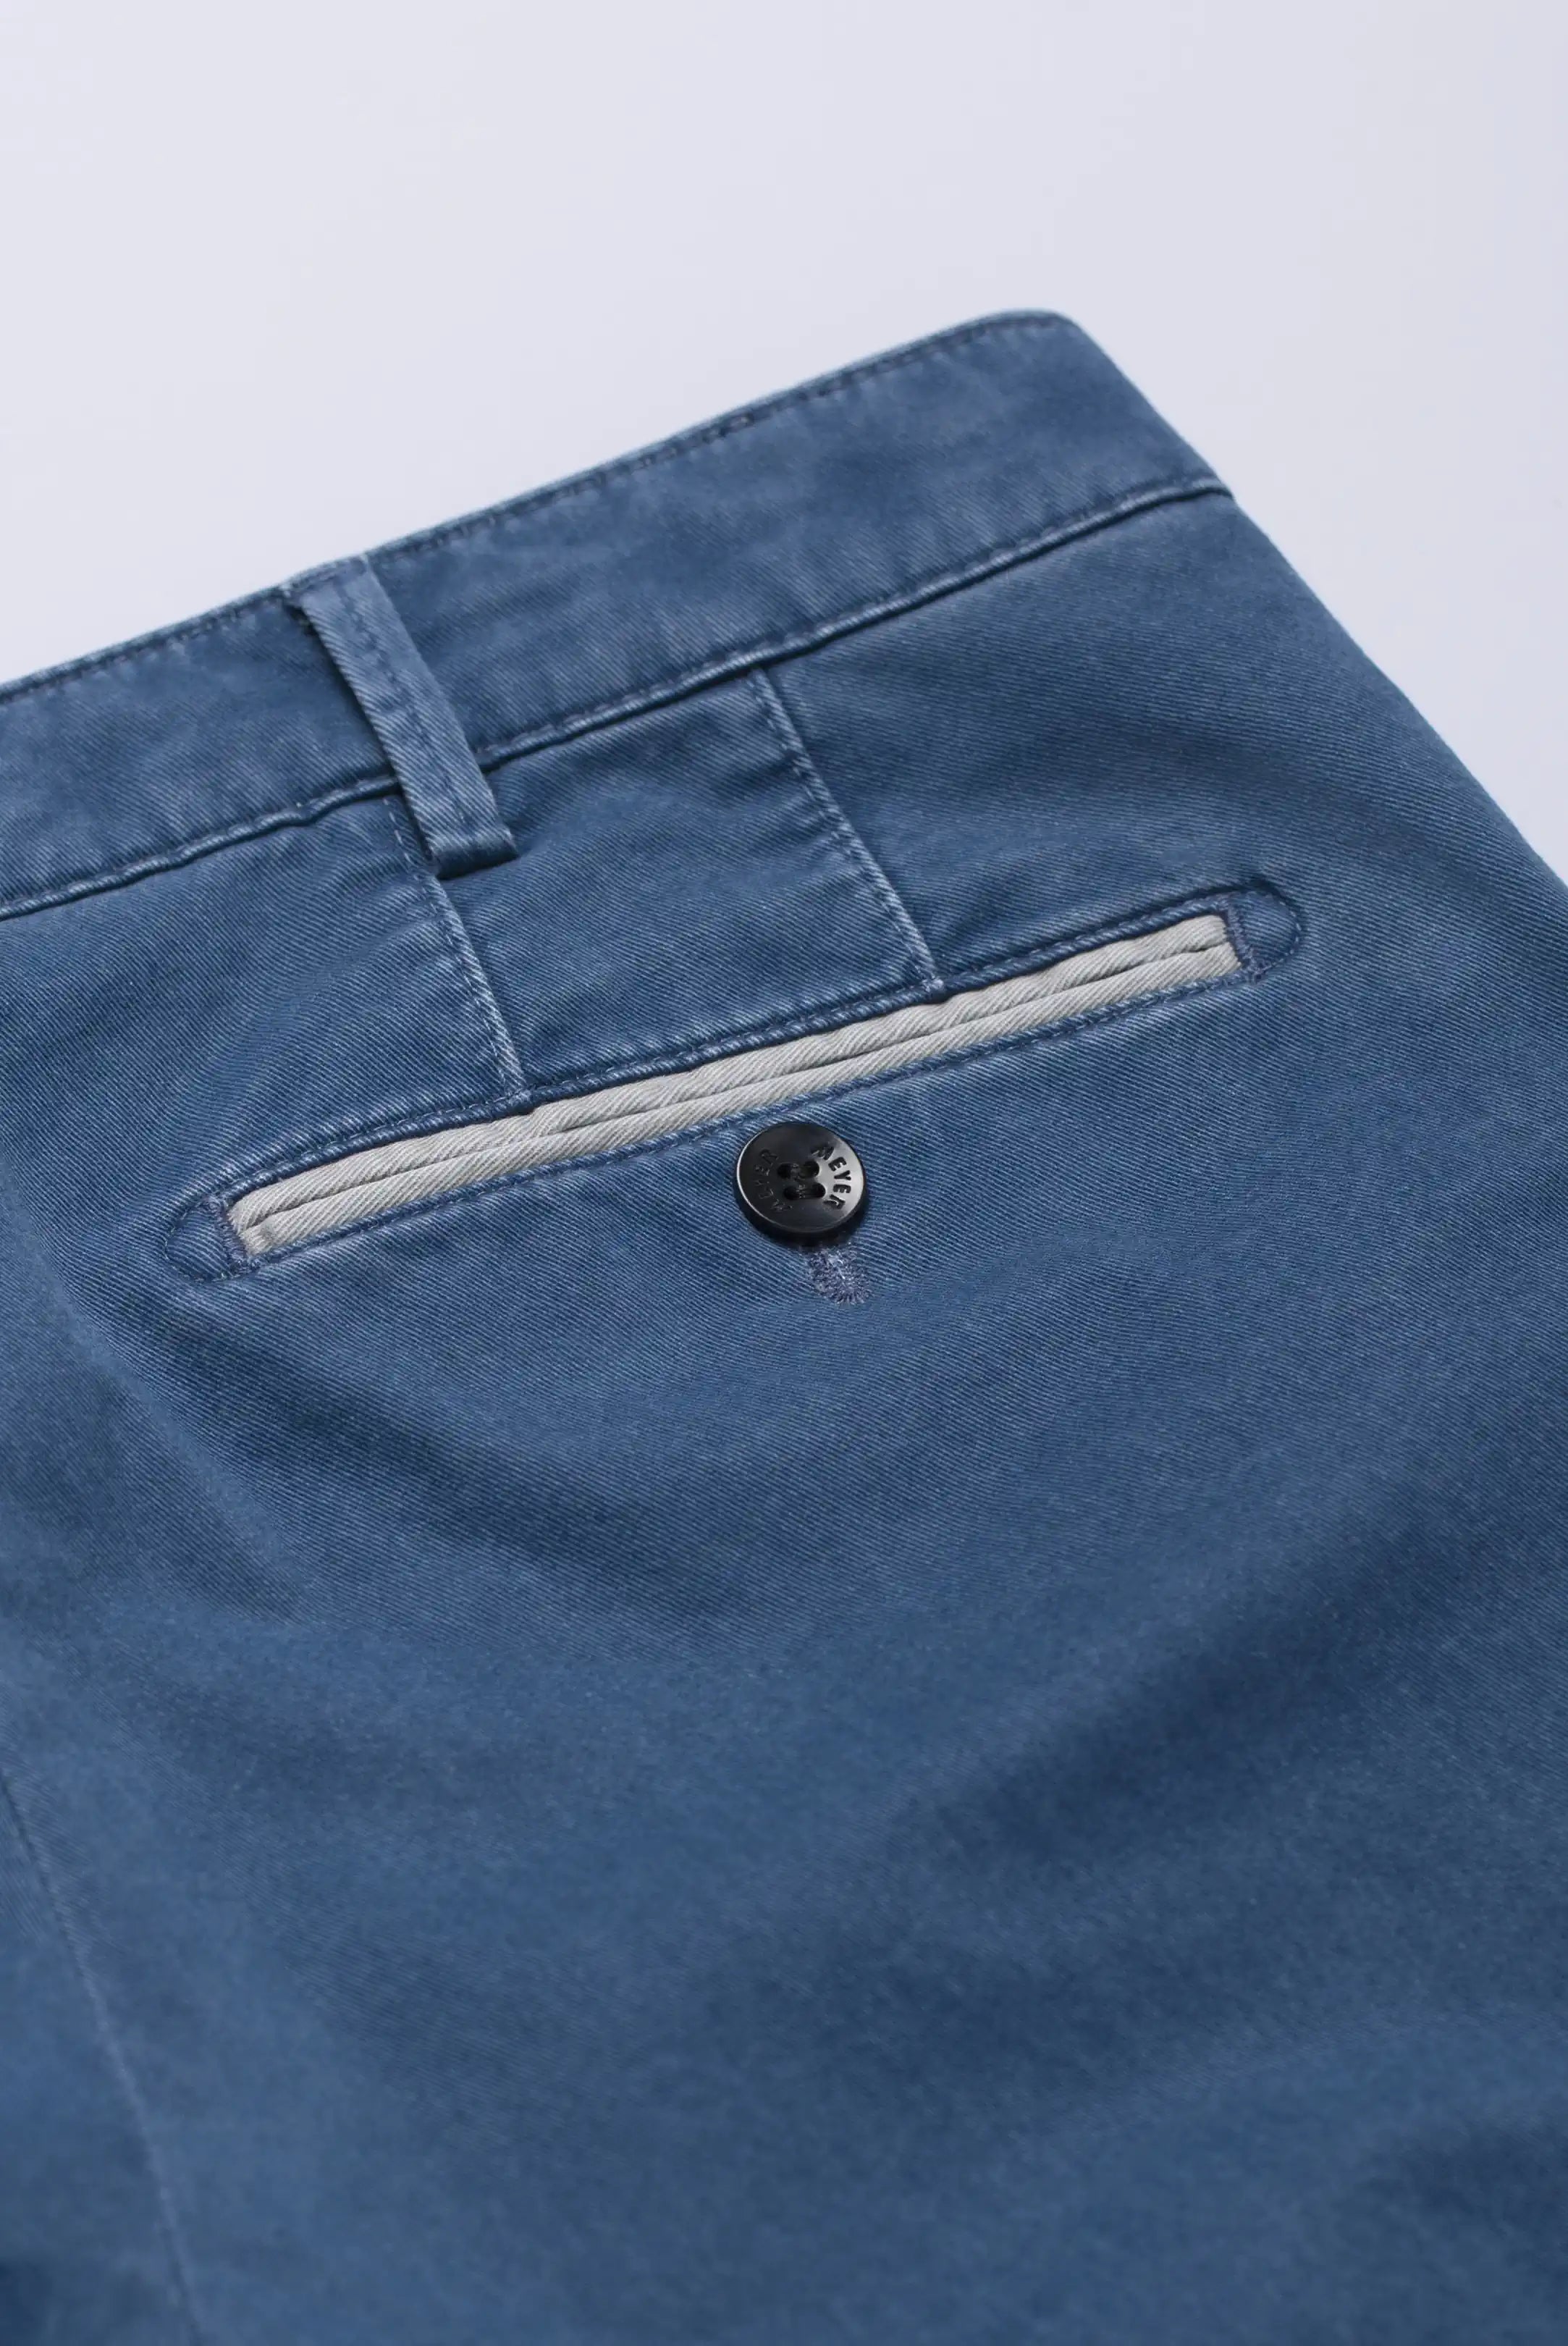 30% OFF - MEYER New York Trousers - 5000 Soft Twill Chino - Blue